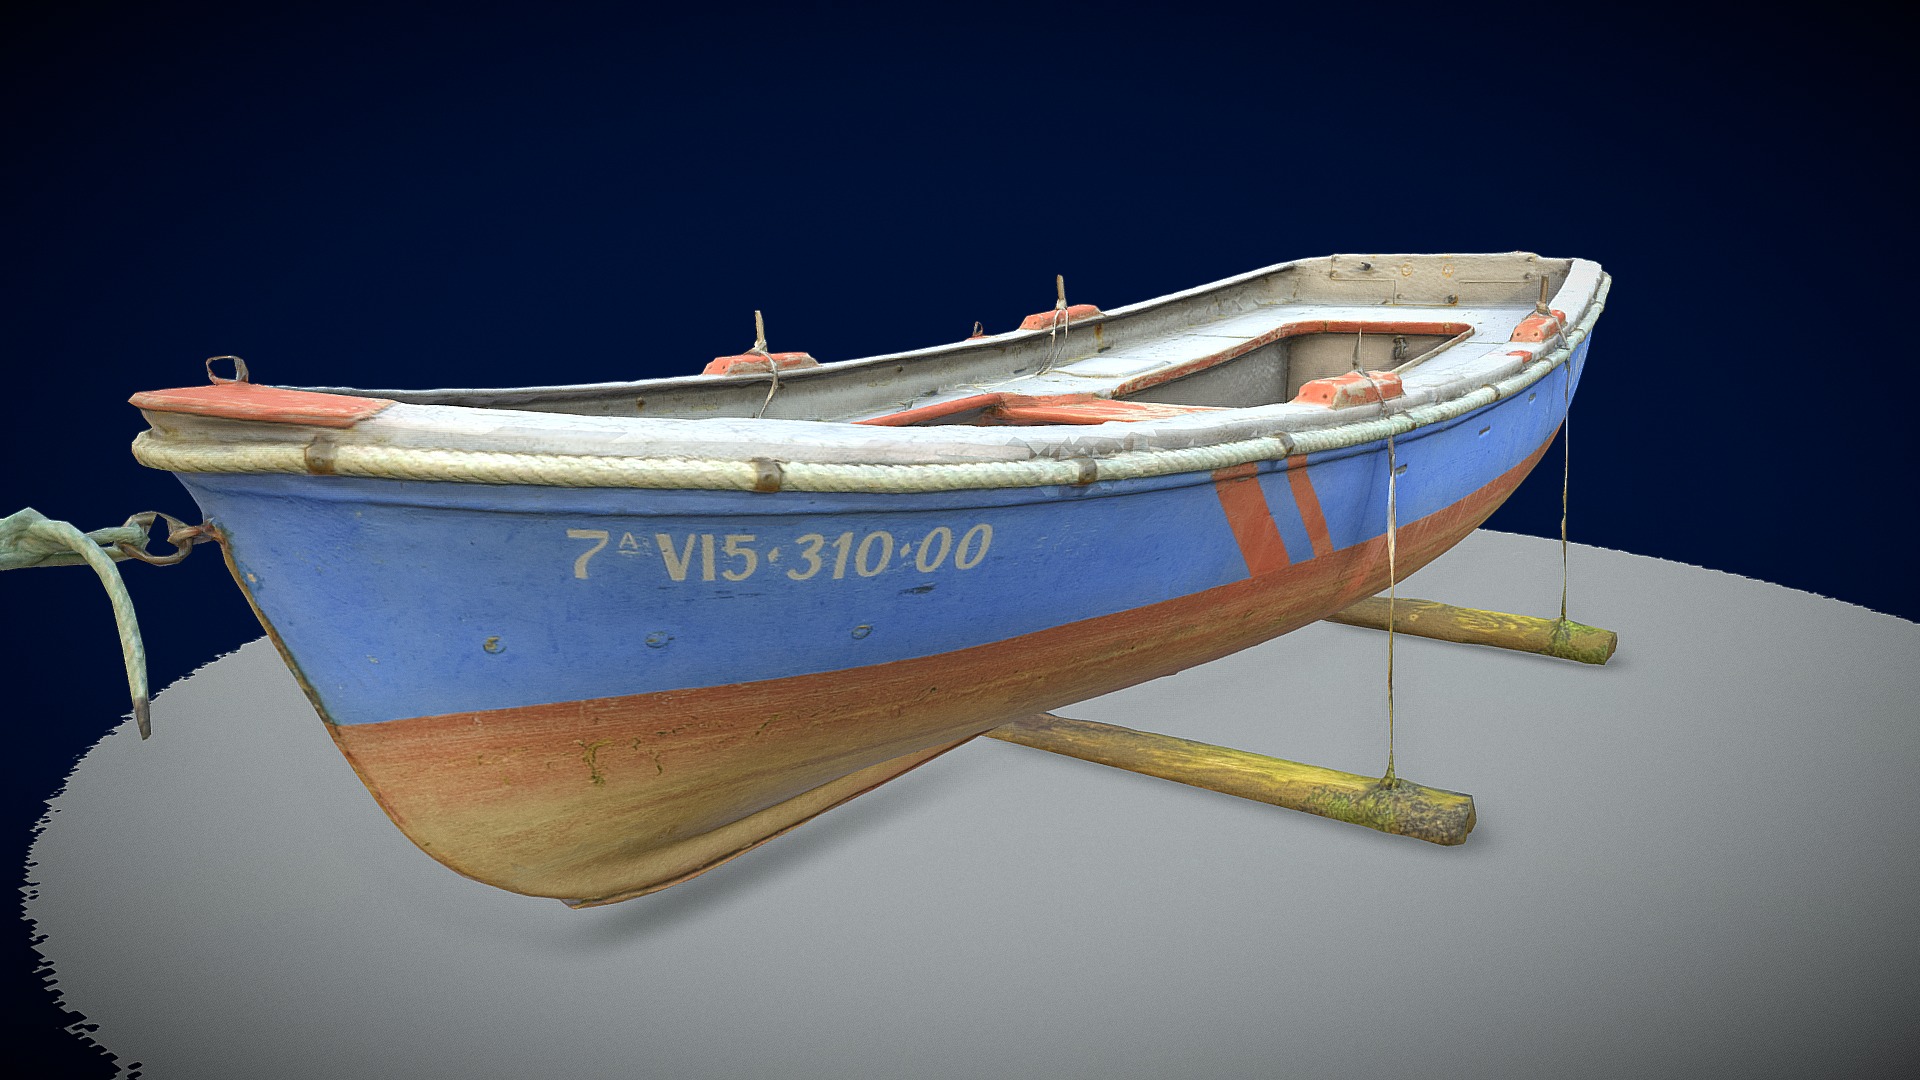 3D model Boat "Campeón" - This is a 3D model of the Boat "Campeón". The 3D model is about a boat on the water.